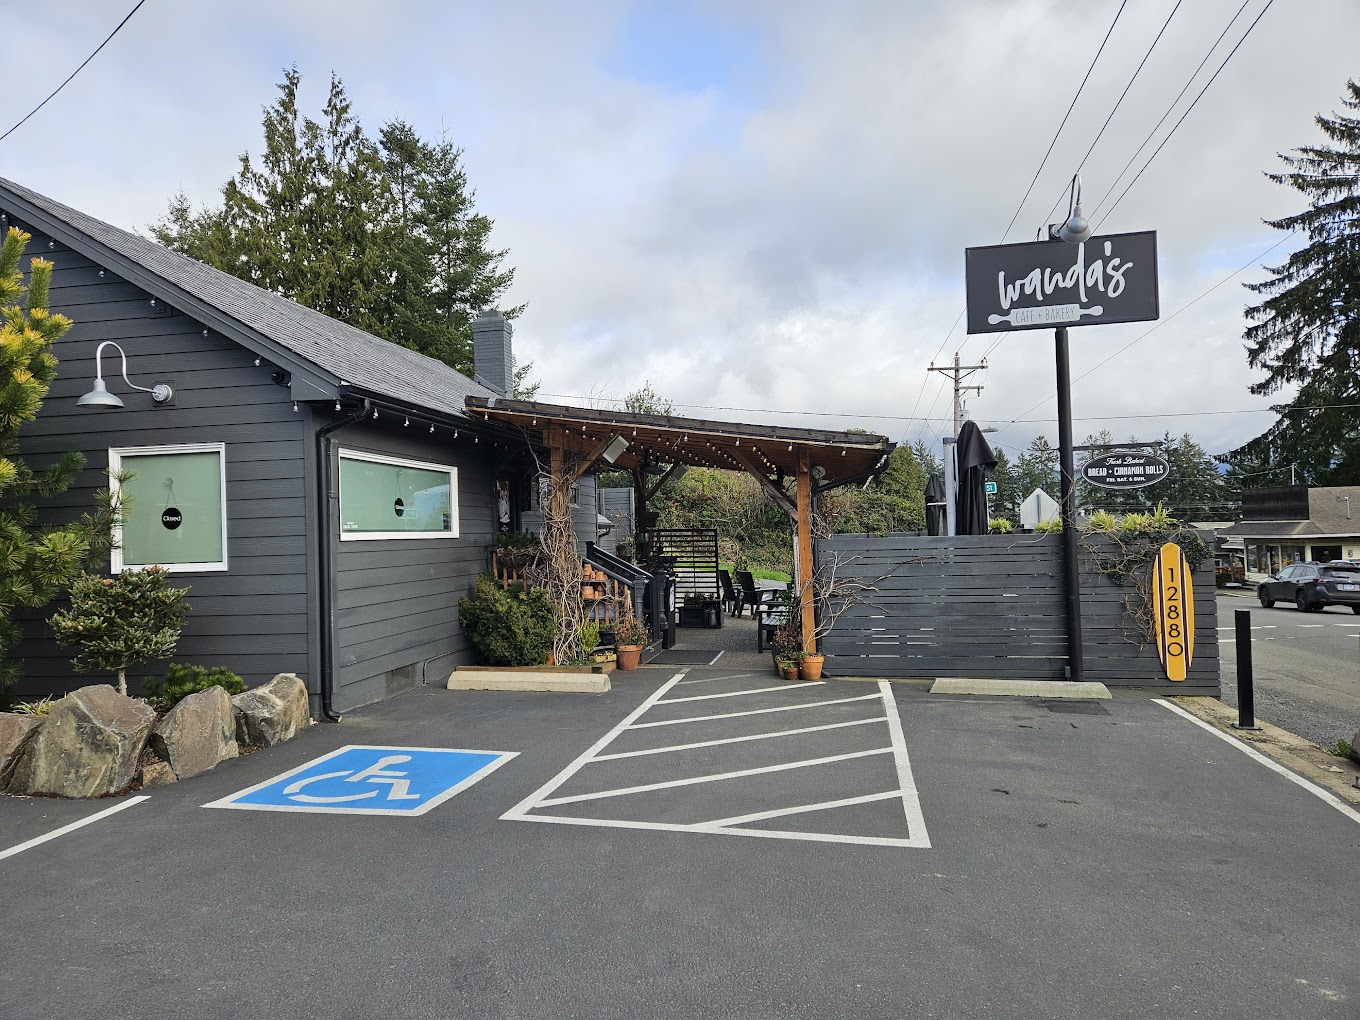 This Unsuspecting Oregon Coast Cafe Is Famous for Their Legendary Cinnamon Rolls